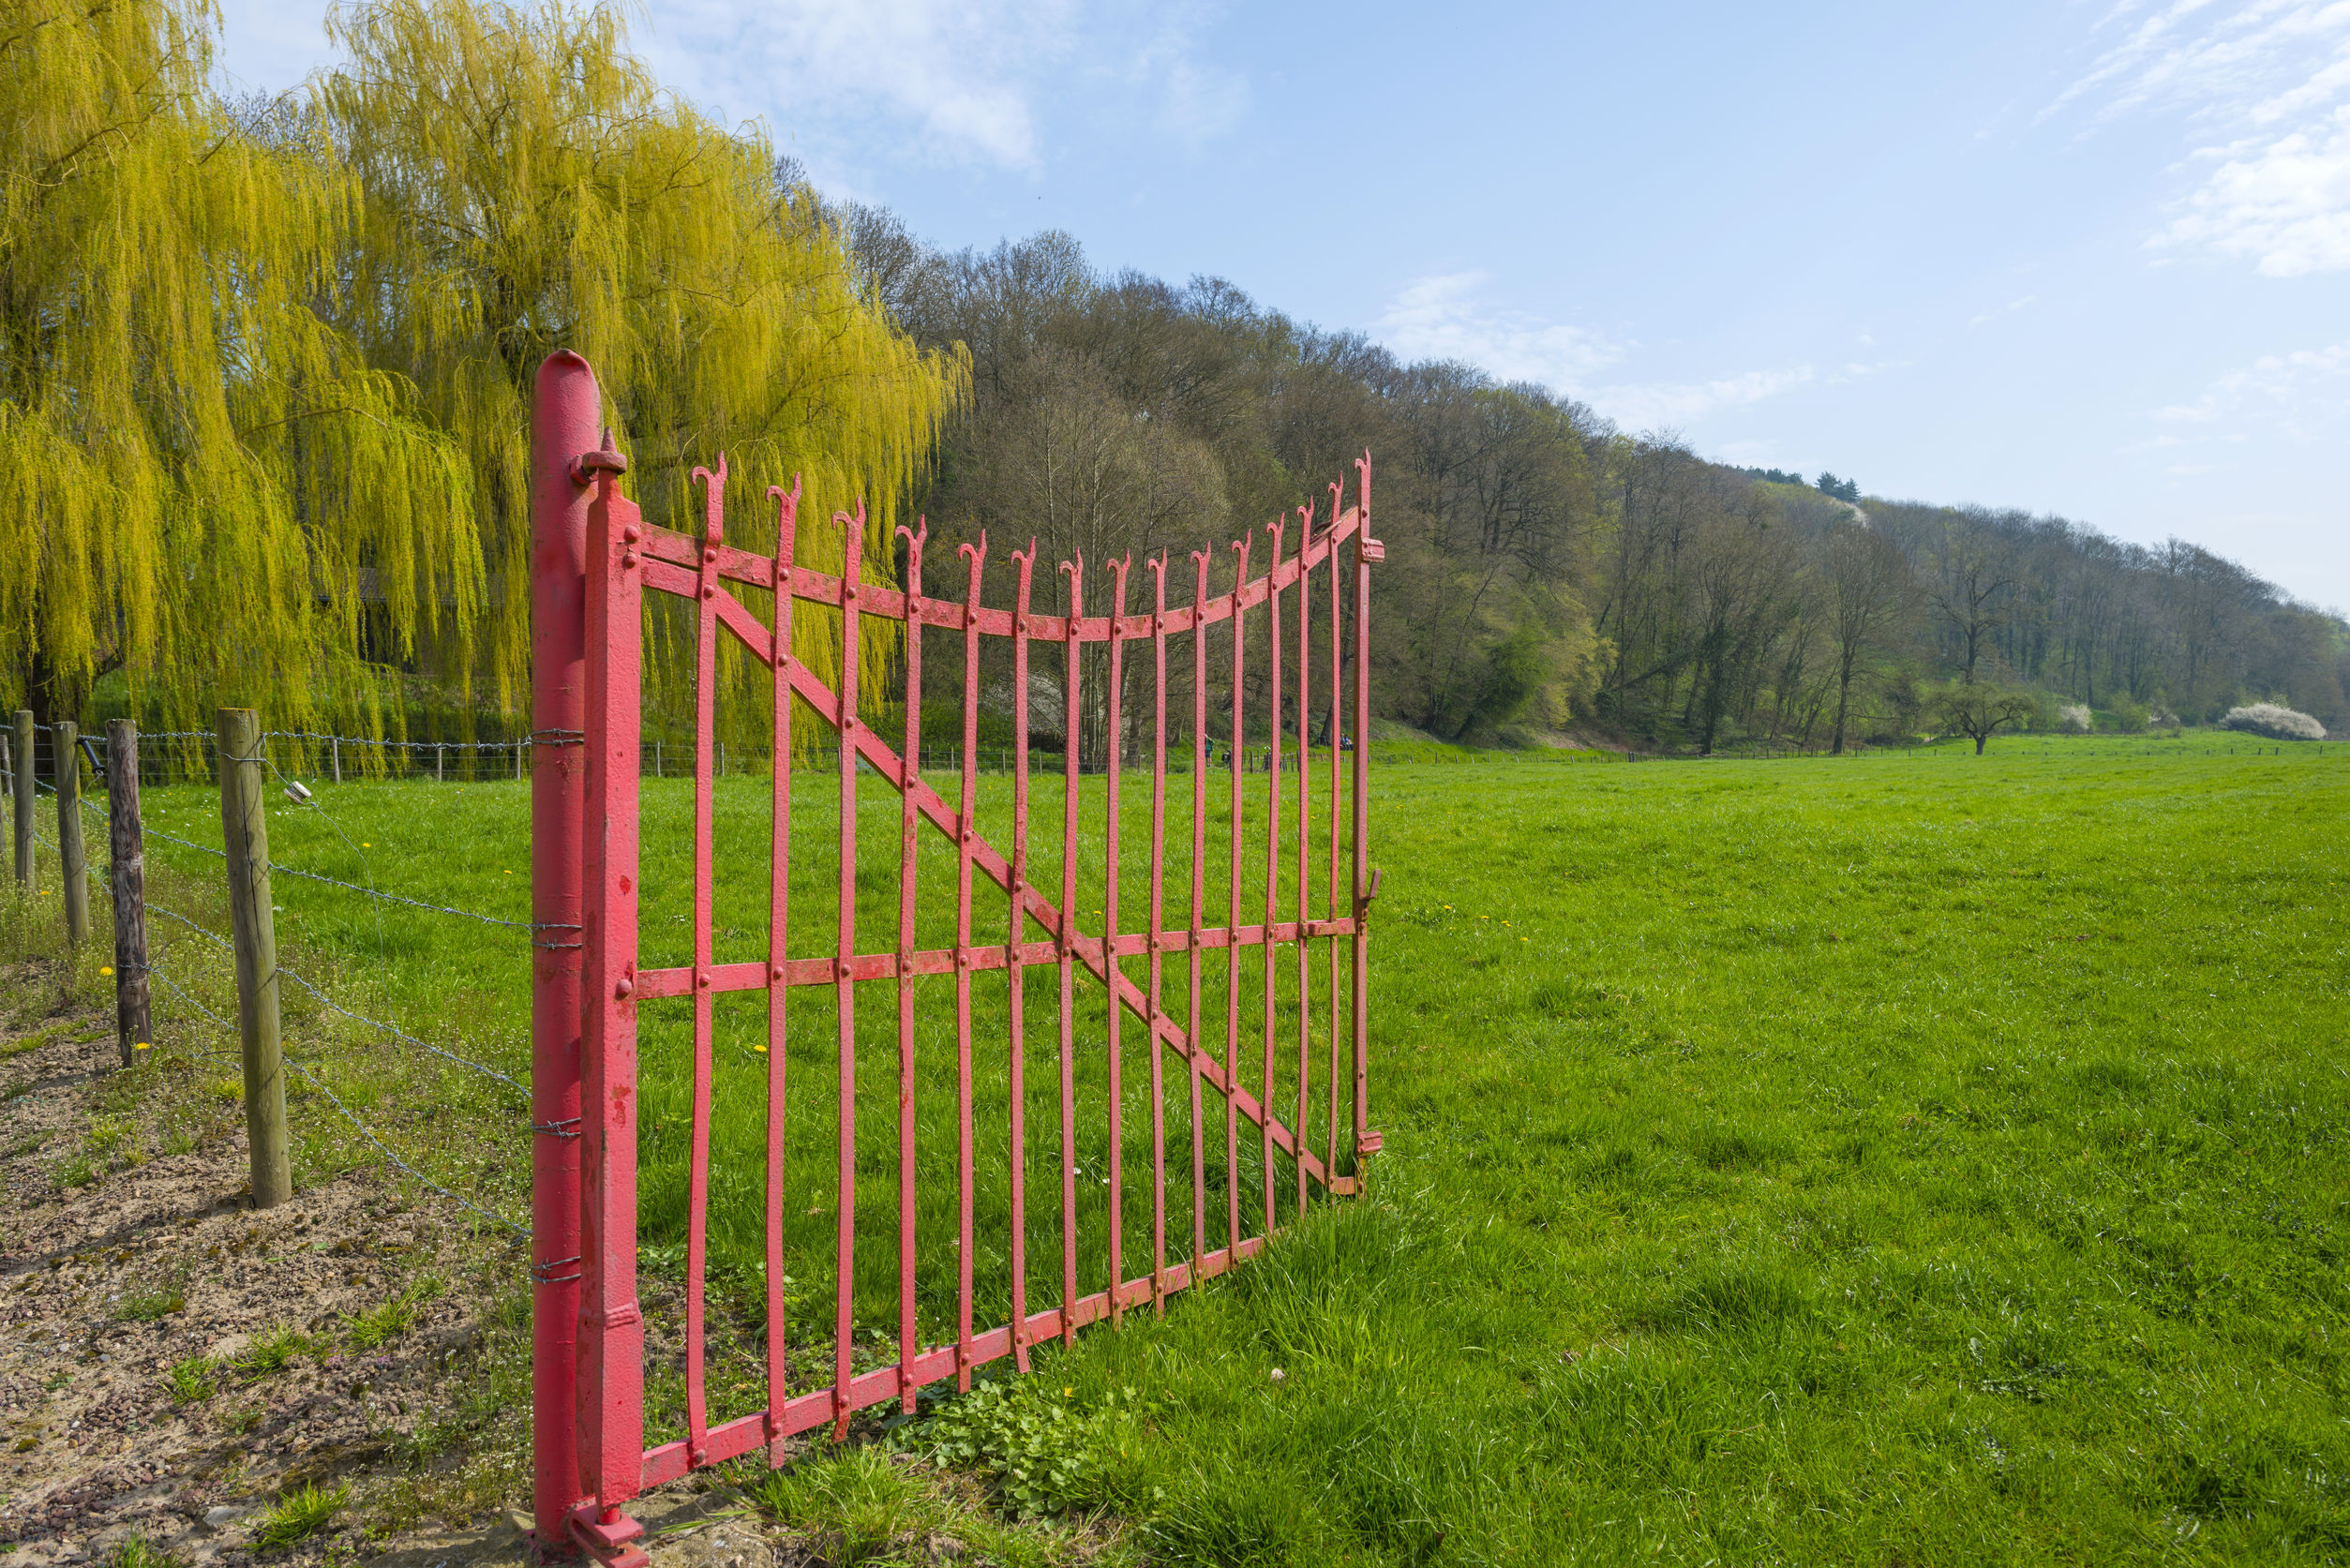 Property owner's right to a gate: an open and shut case?